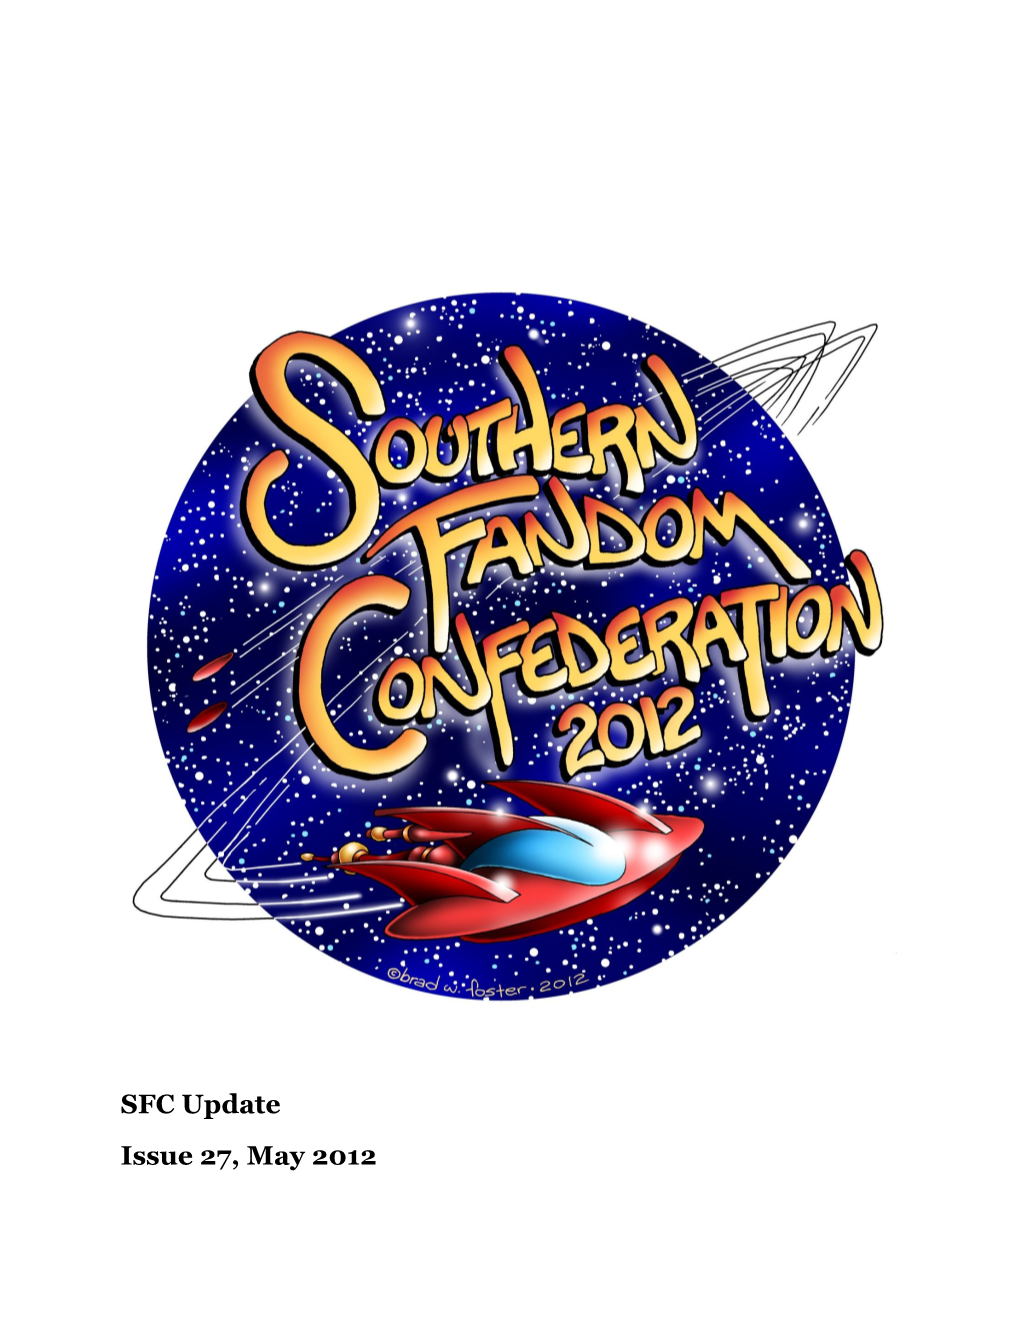 SFC Update Issue 27, May 2012